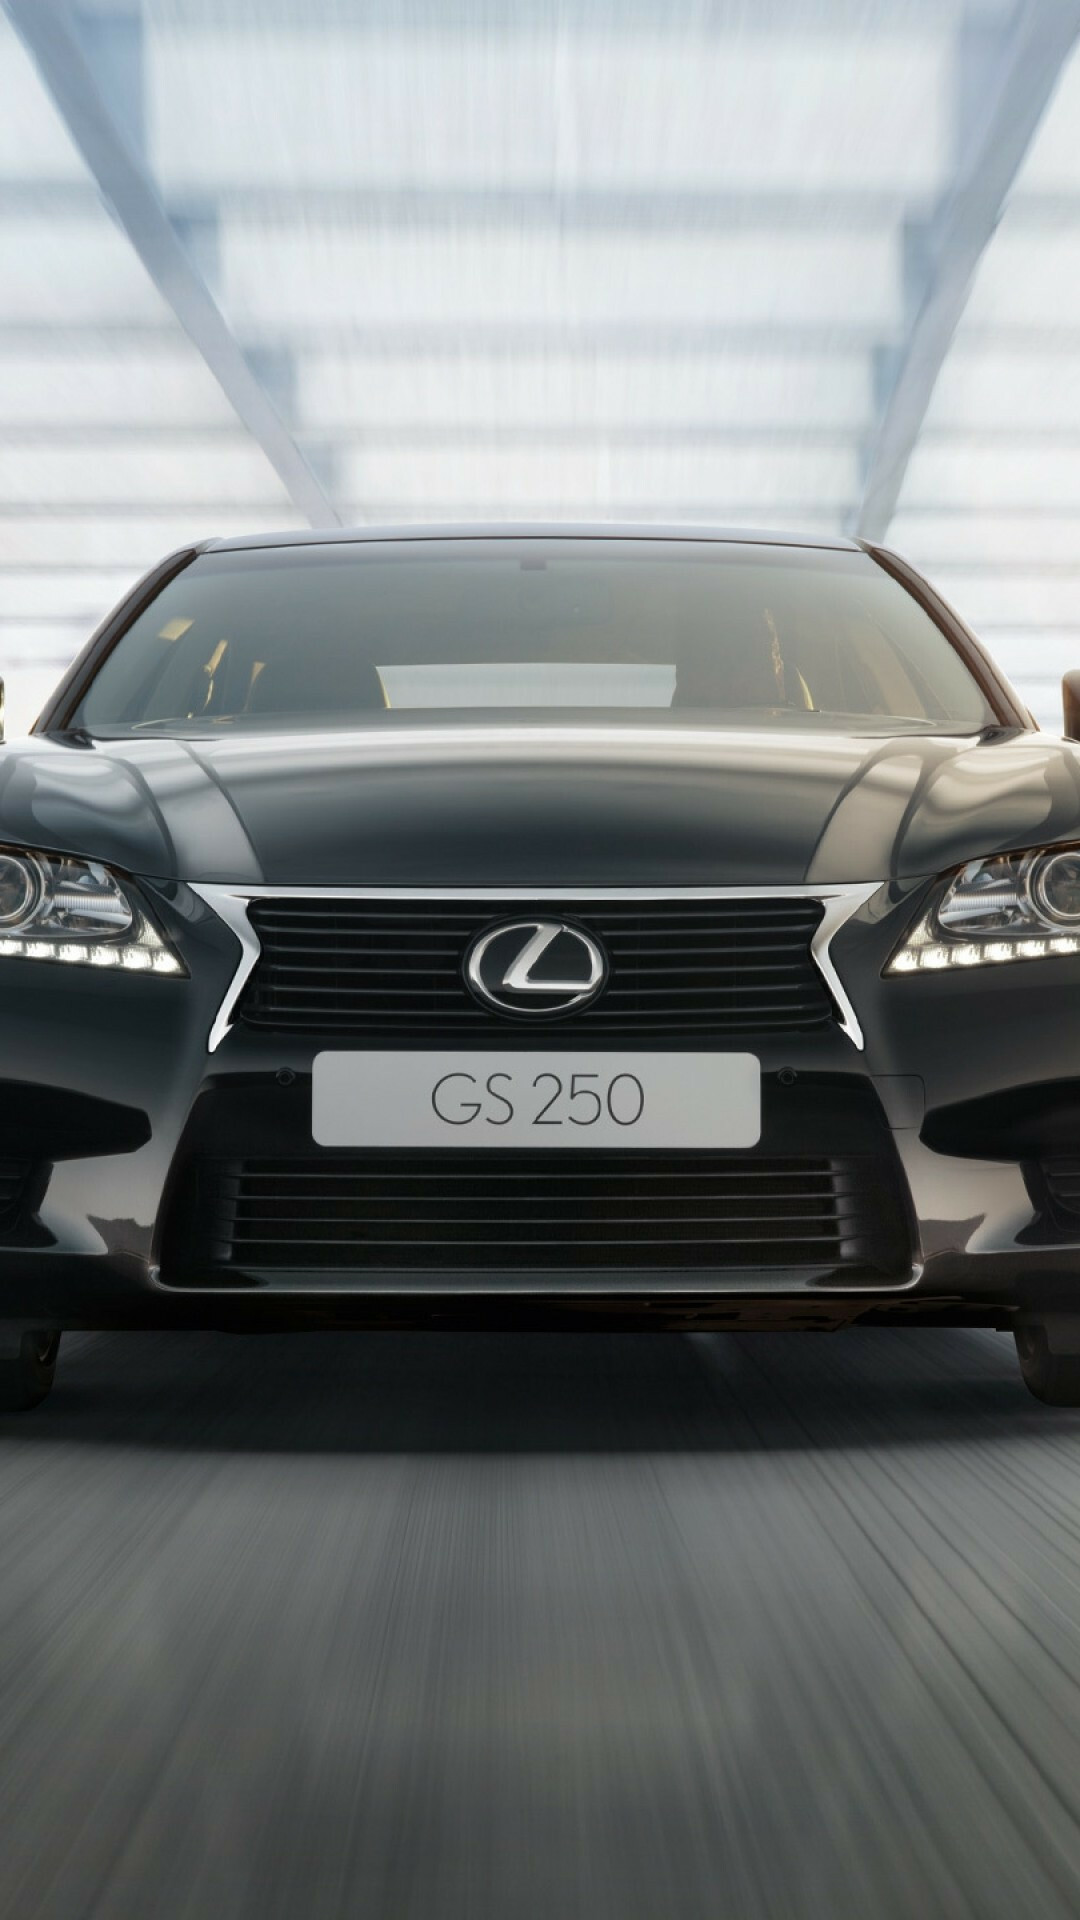 Lexus: GS 250, Designed as a performance sedan competing in the mid-luxury class. 1080x1920 Full HD Wallpaper.